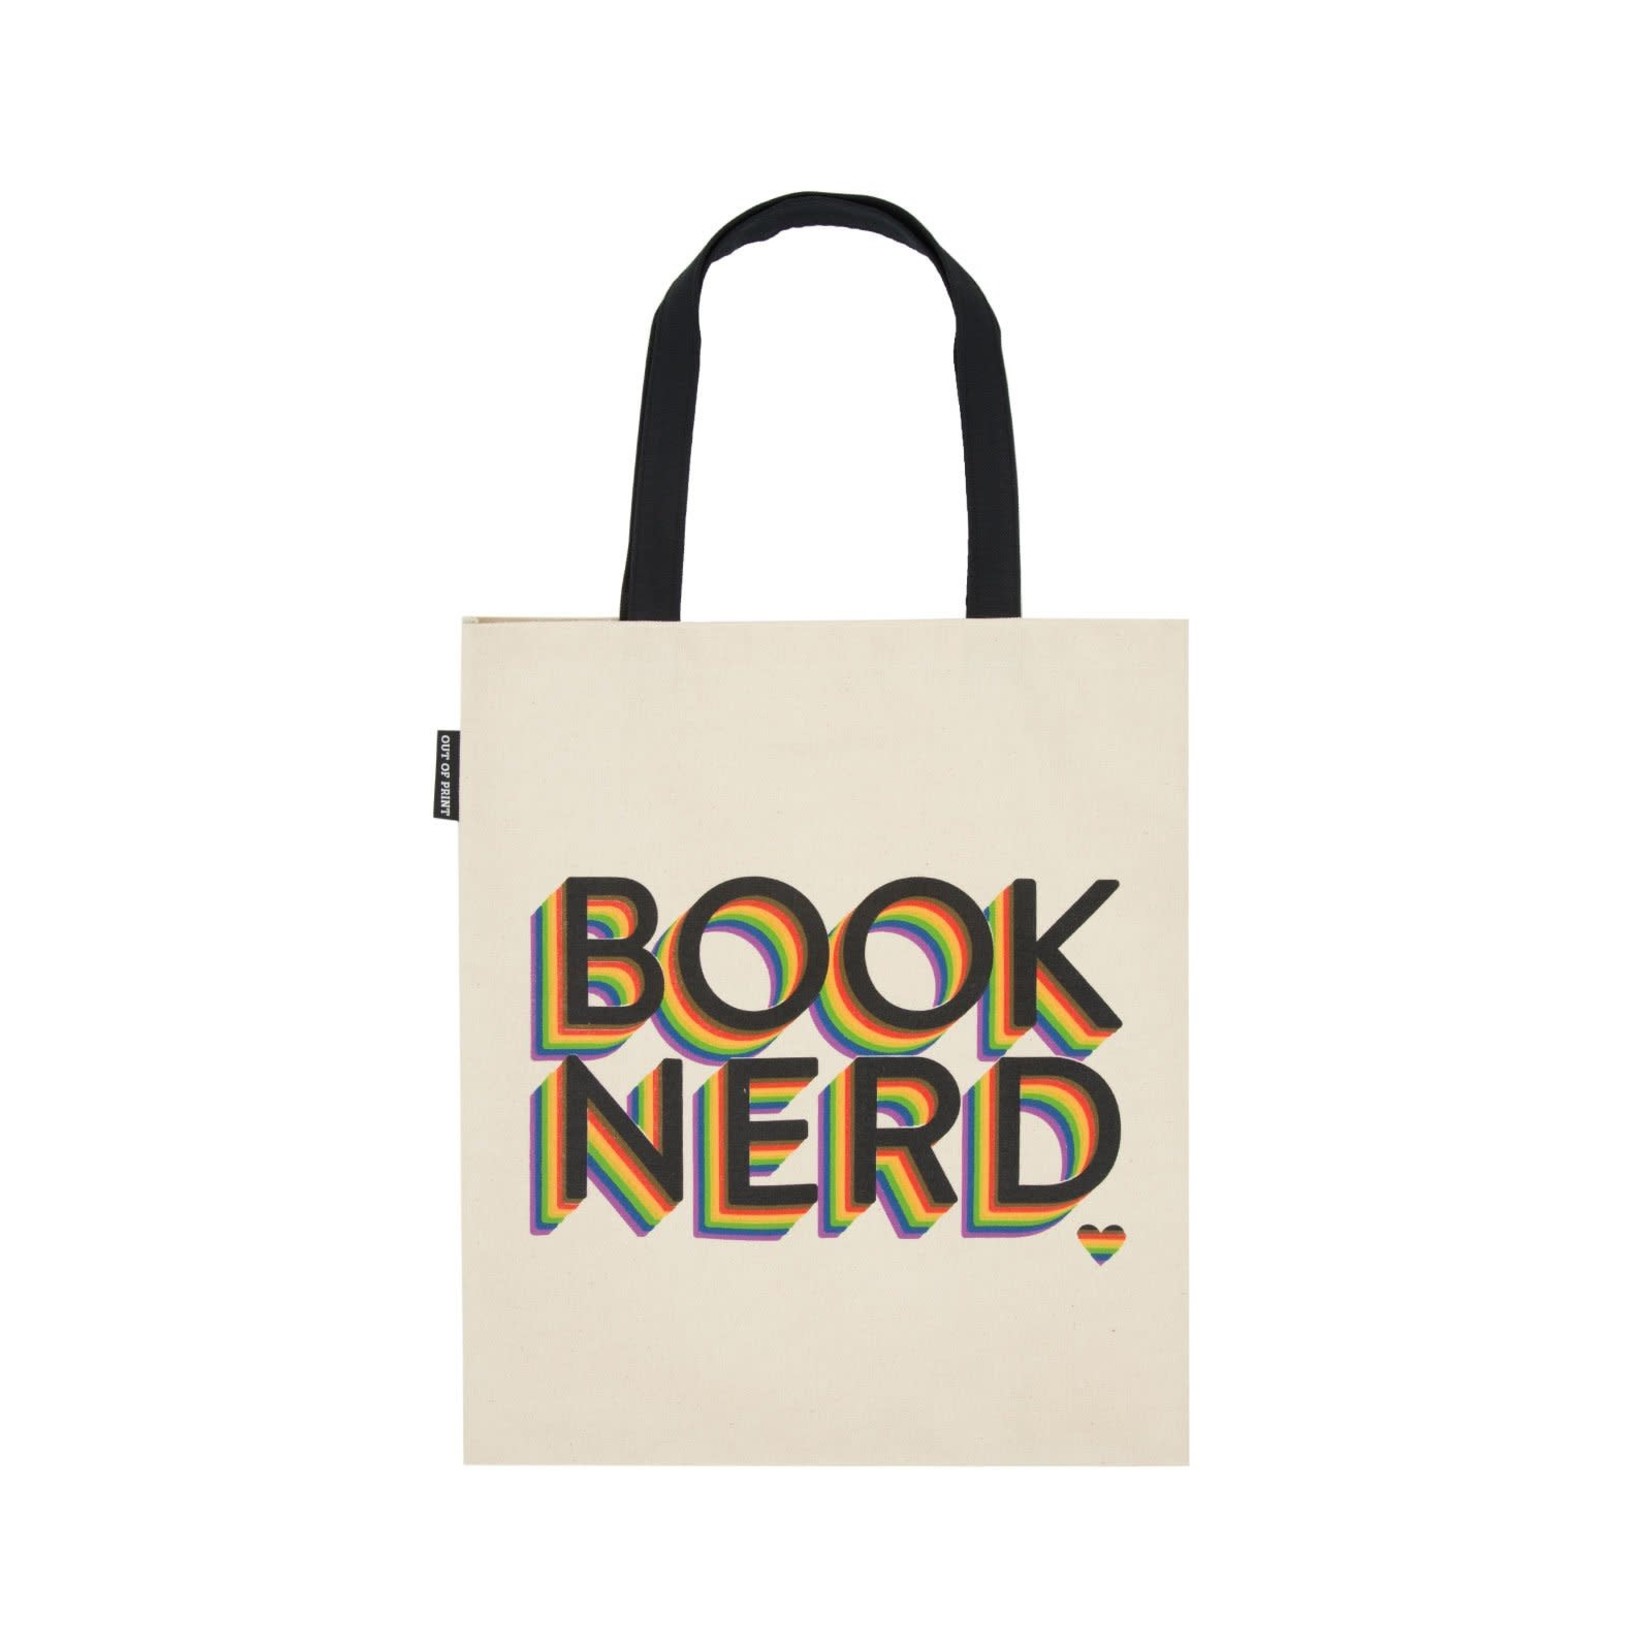 Out Of Print "Book Nerd" Tote